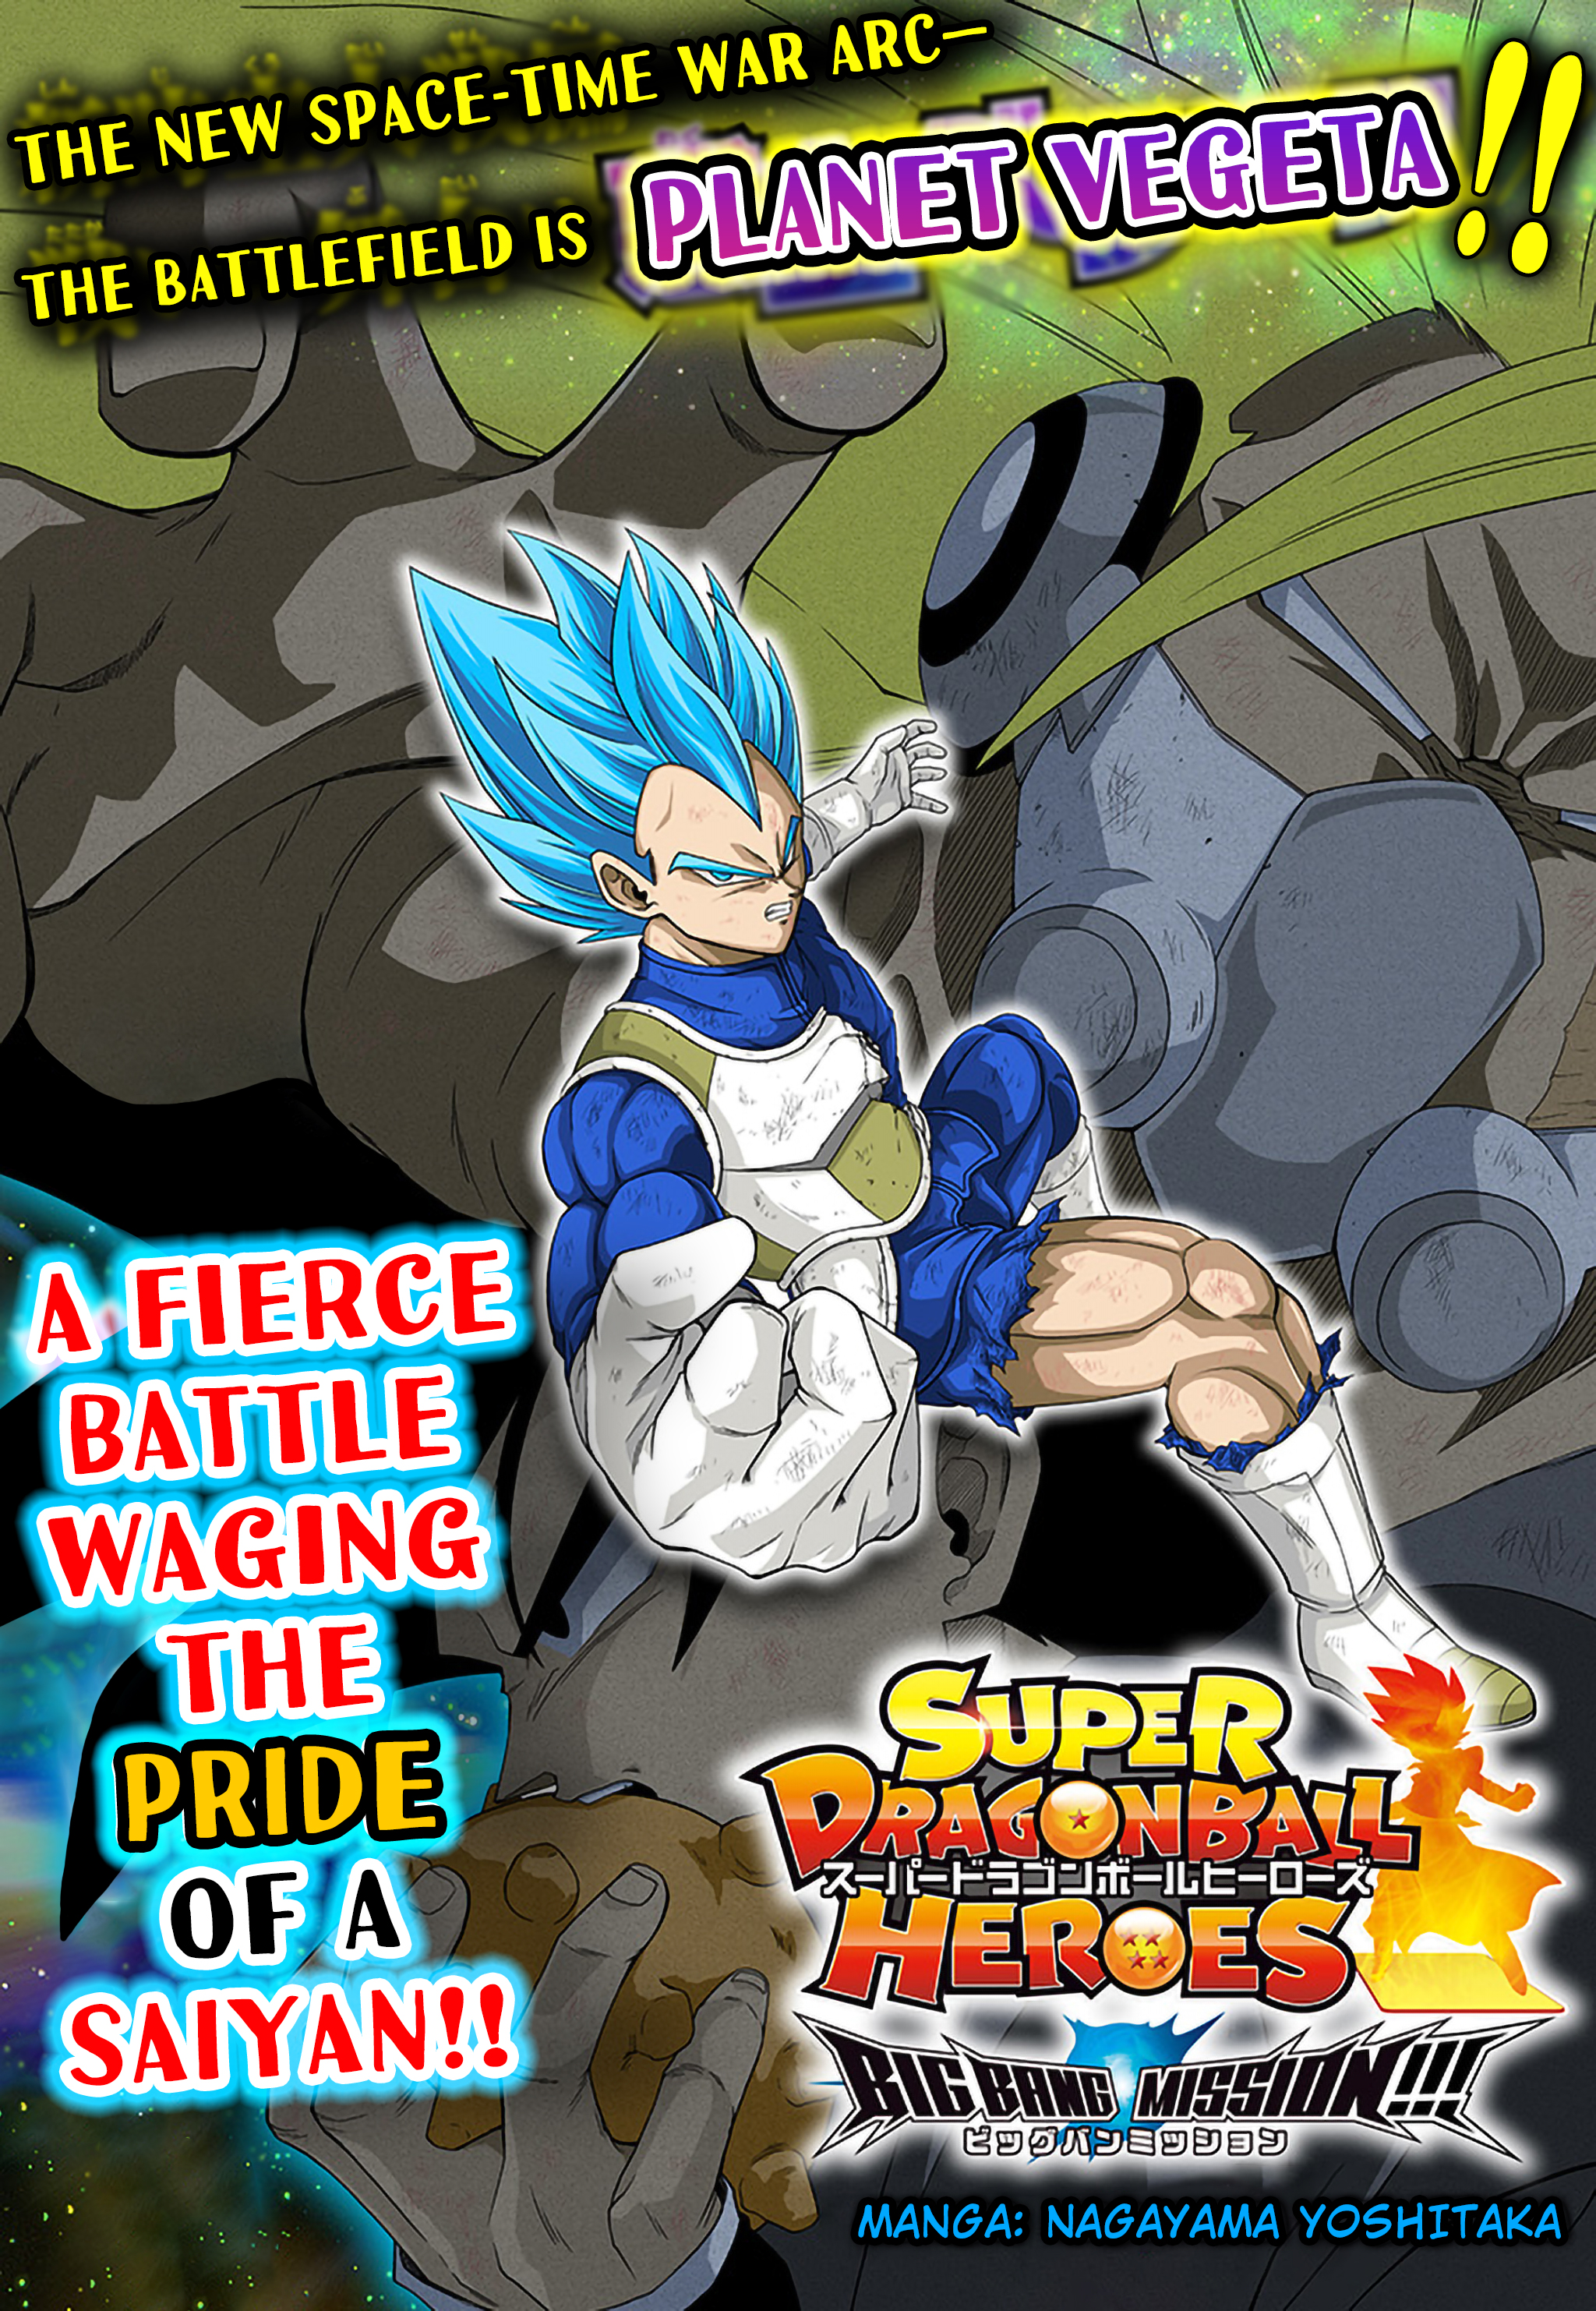 Super Dragon Ball Heroes: Big Bang Mission! Vol.2 Chapter 8: A Fierce Battle Waging The Pride Of A Saiyan!!! - Picture 1